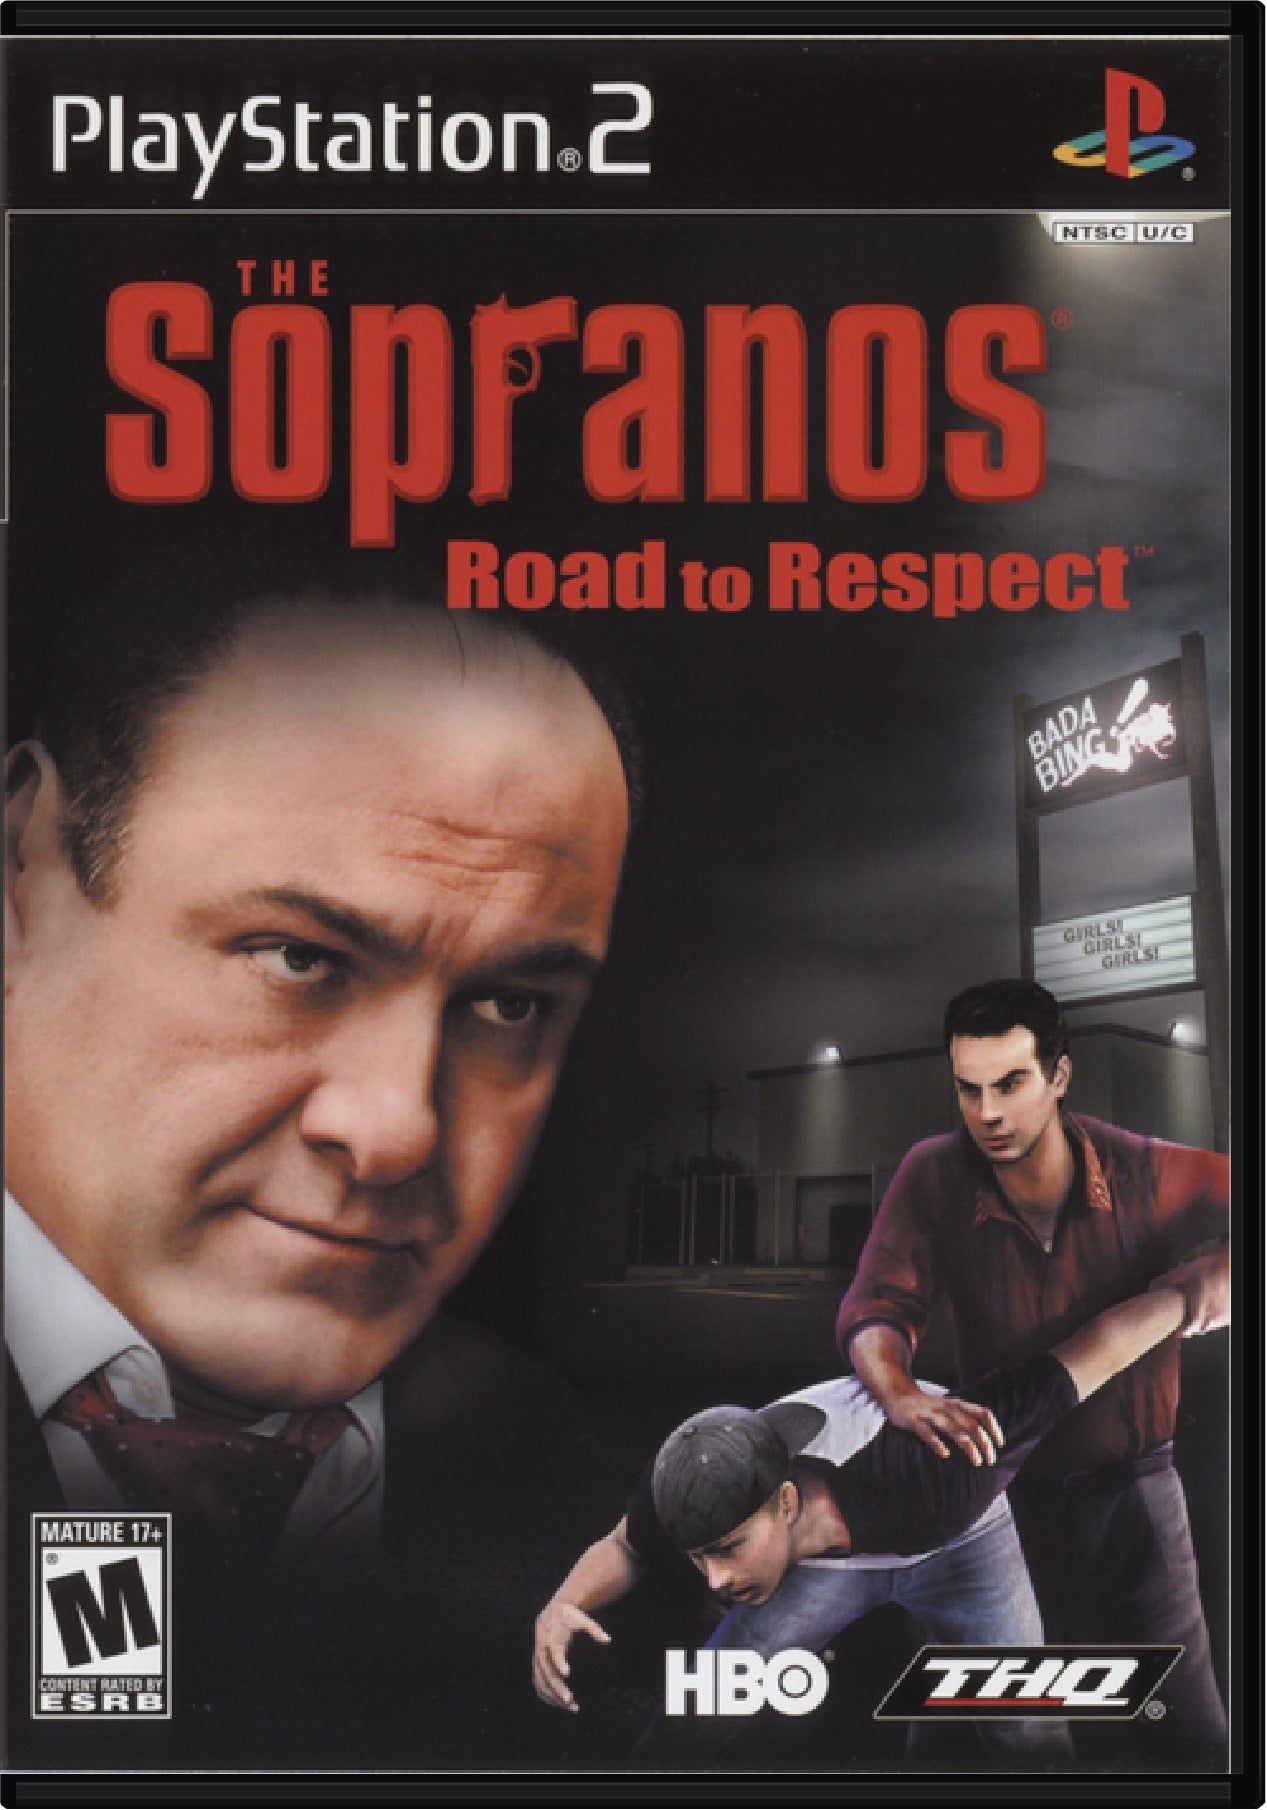 Sopranos Road to Respect Cover Art and Product Photo